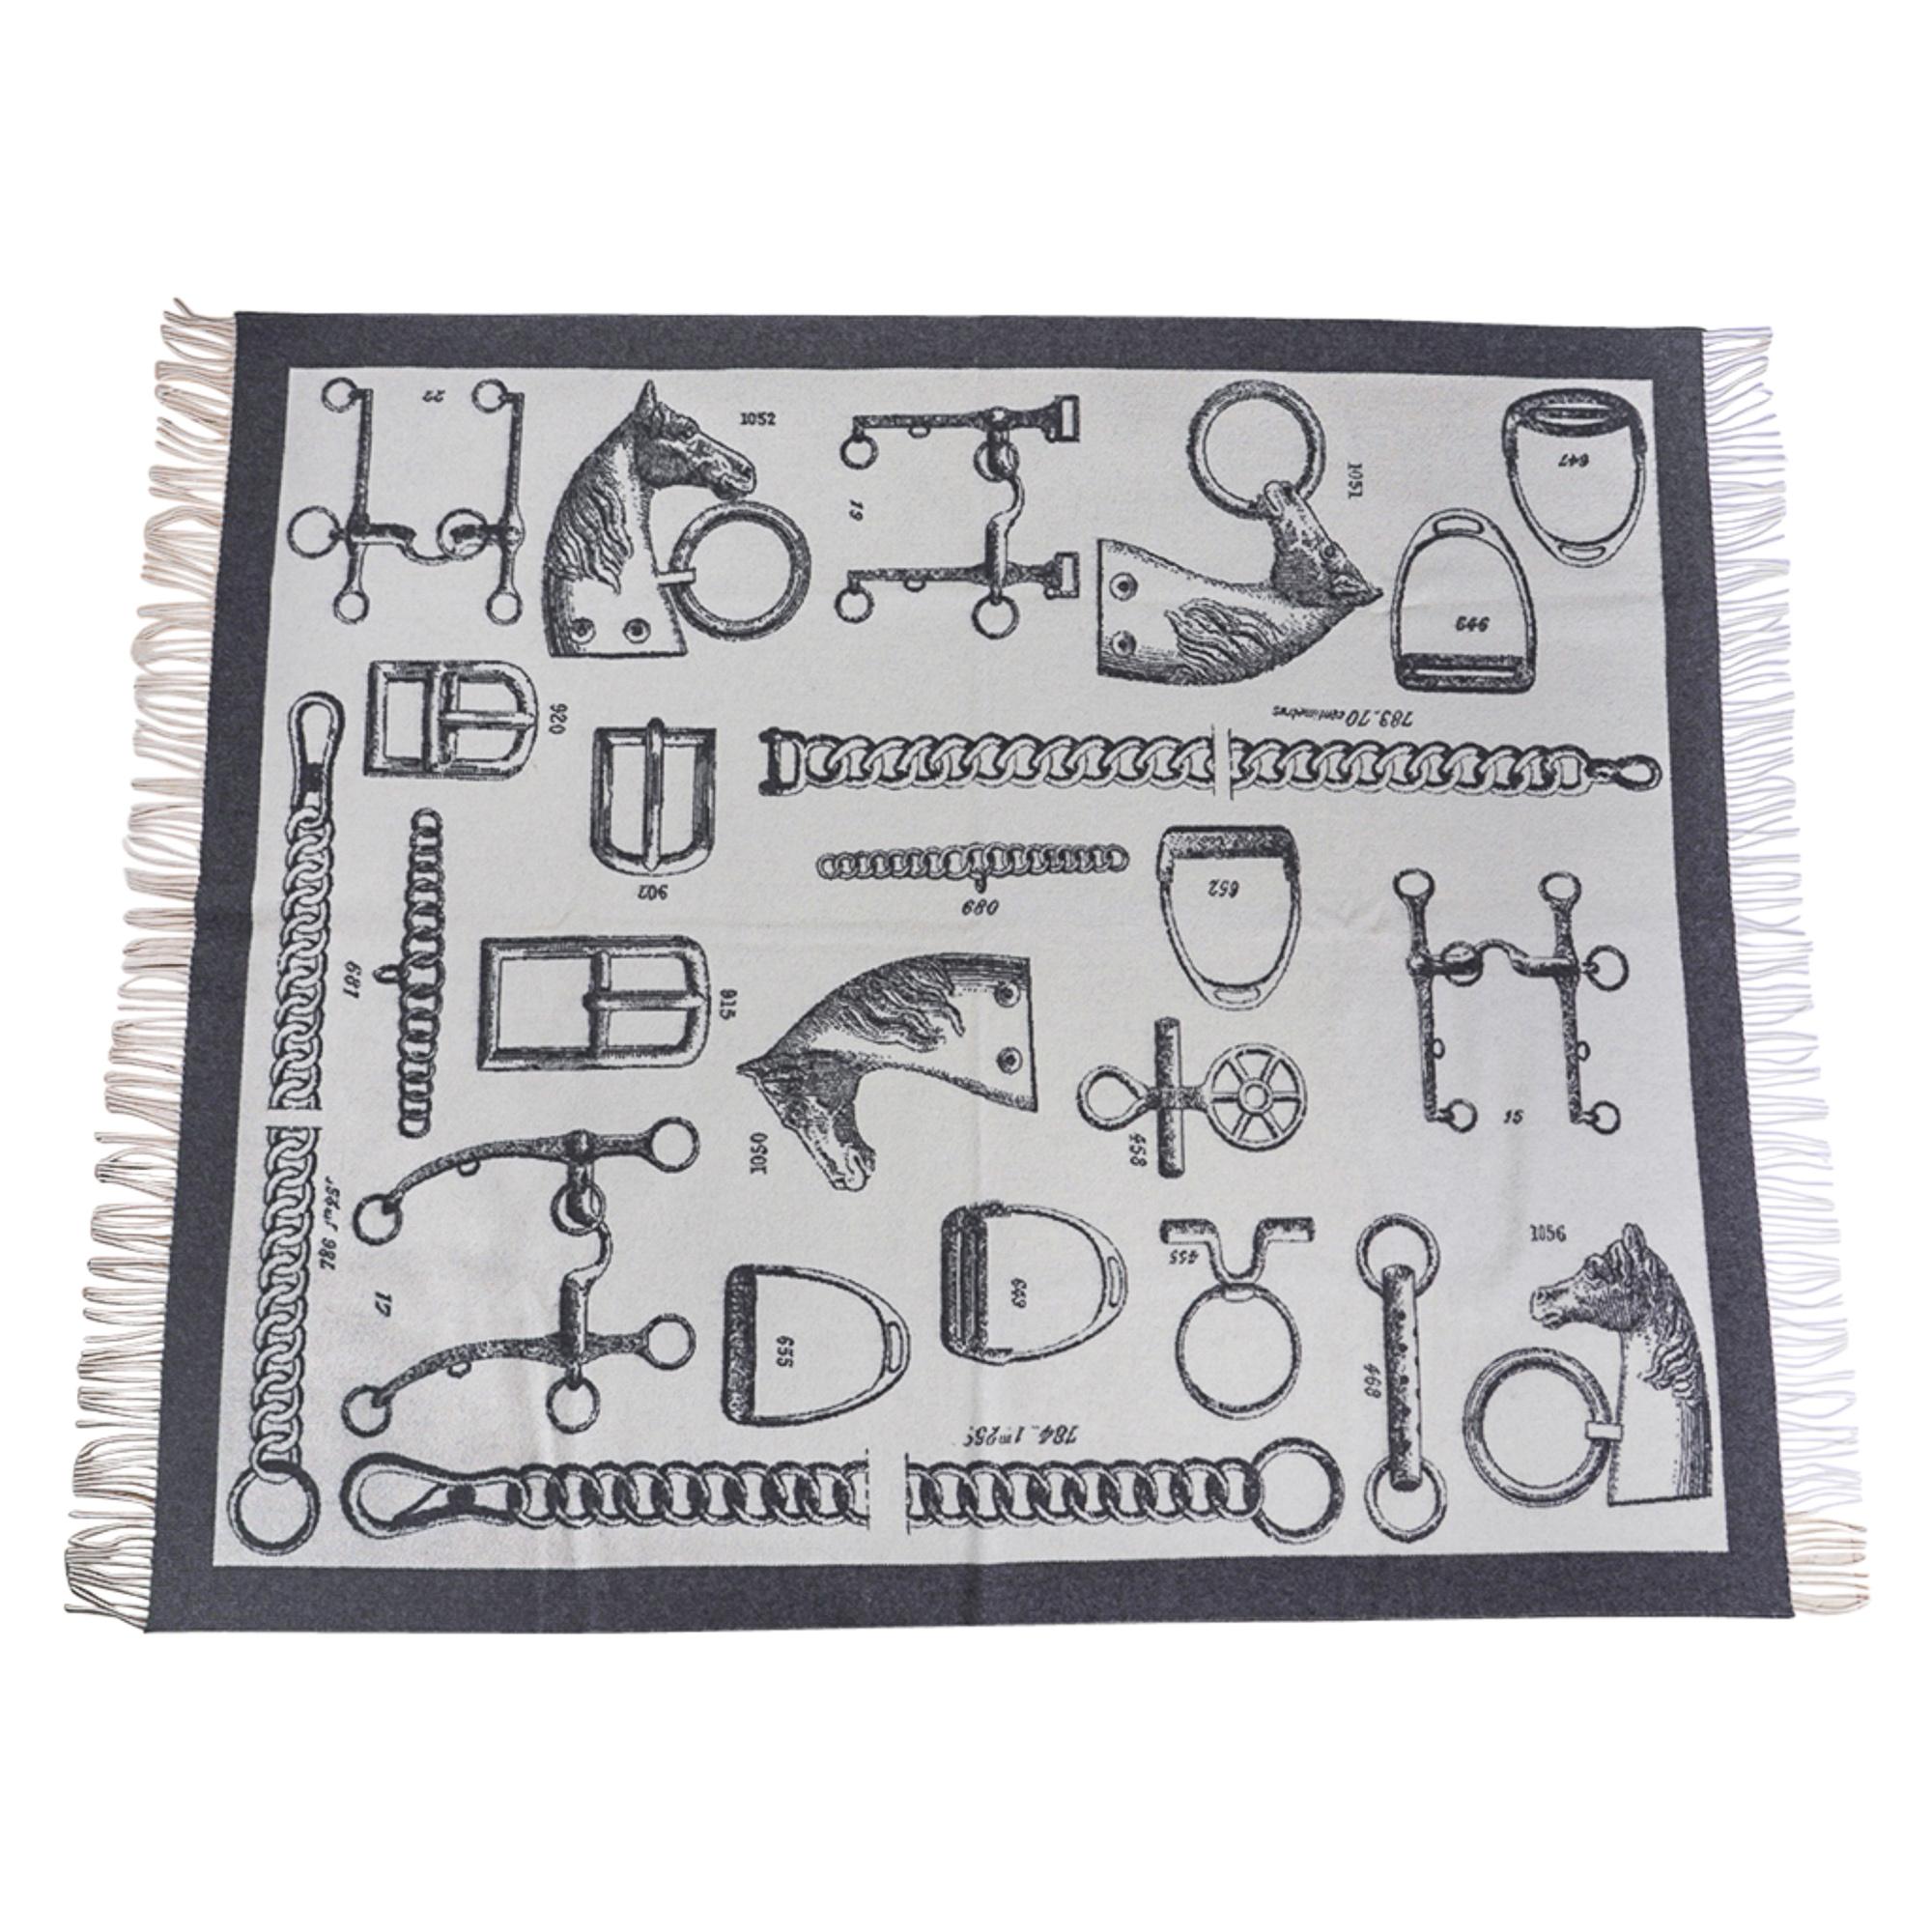 Mightychic offers a rare Hermes limited edition Metalleries reversible blanket featured in Gris and Ecru.
Detailed equestrian objects adorn the fringed edged Hermes Blanket.
Created from 72% Cashmere and 90% Wool this wonderfully warm blanket is a